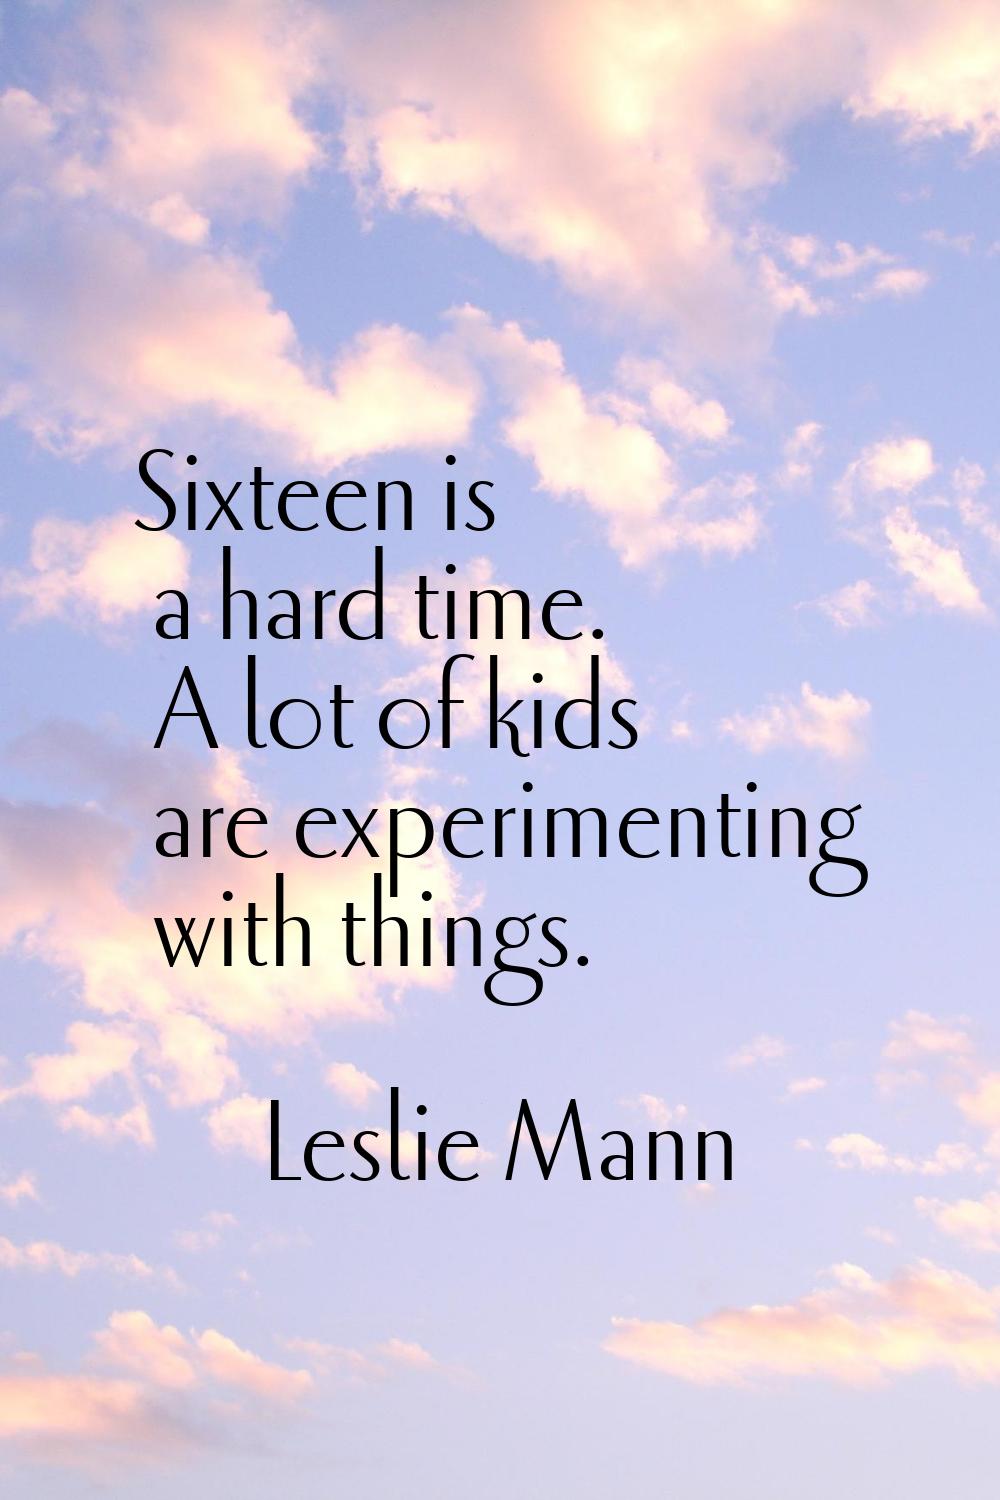 Sixteen is a hard time. A lot of kids are experimenting with things.